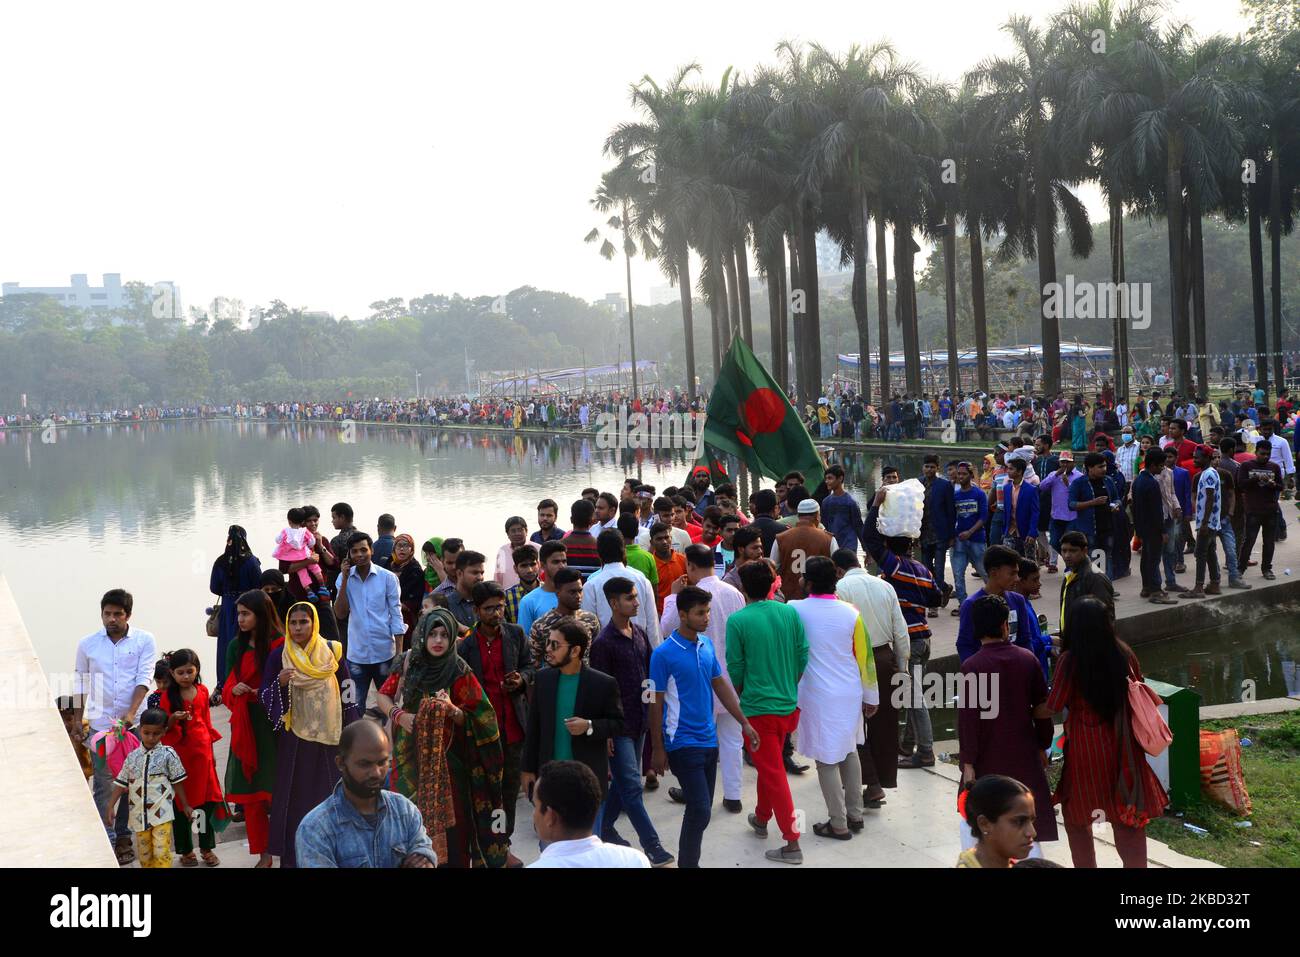 Bangladeshi People goatherd at the Victory Day celebrations ceremony in Dhaka, Bangladesh on December 16, 2019. Bangladesh marks its 49th Victory Day to commemorate the victory of the Allied forces High Command over the Pakistani forces in the Bangladesh Liberation War in 1971. Bangladesh became a free nation on 16 December 1971 after a nine-month bloody war with Pakistan. (Photo by Mamunur Rashid/NurPhoto) Stock Photo